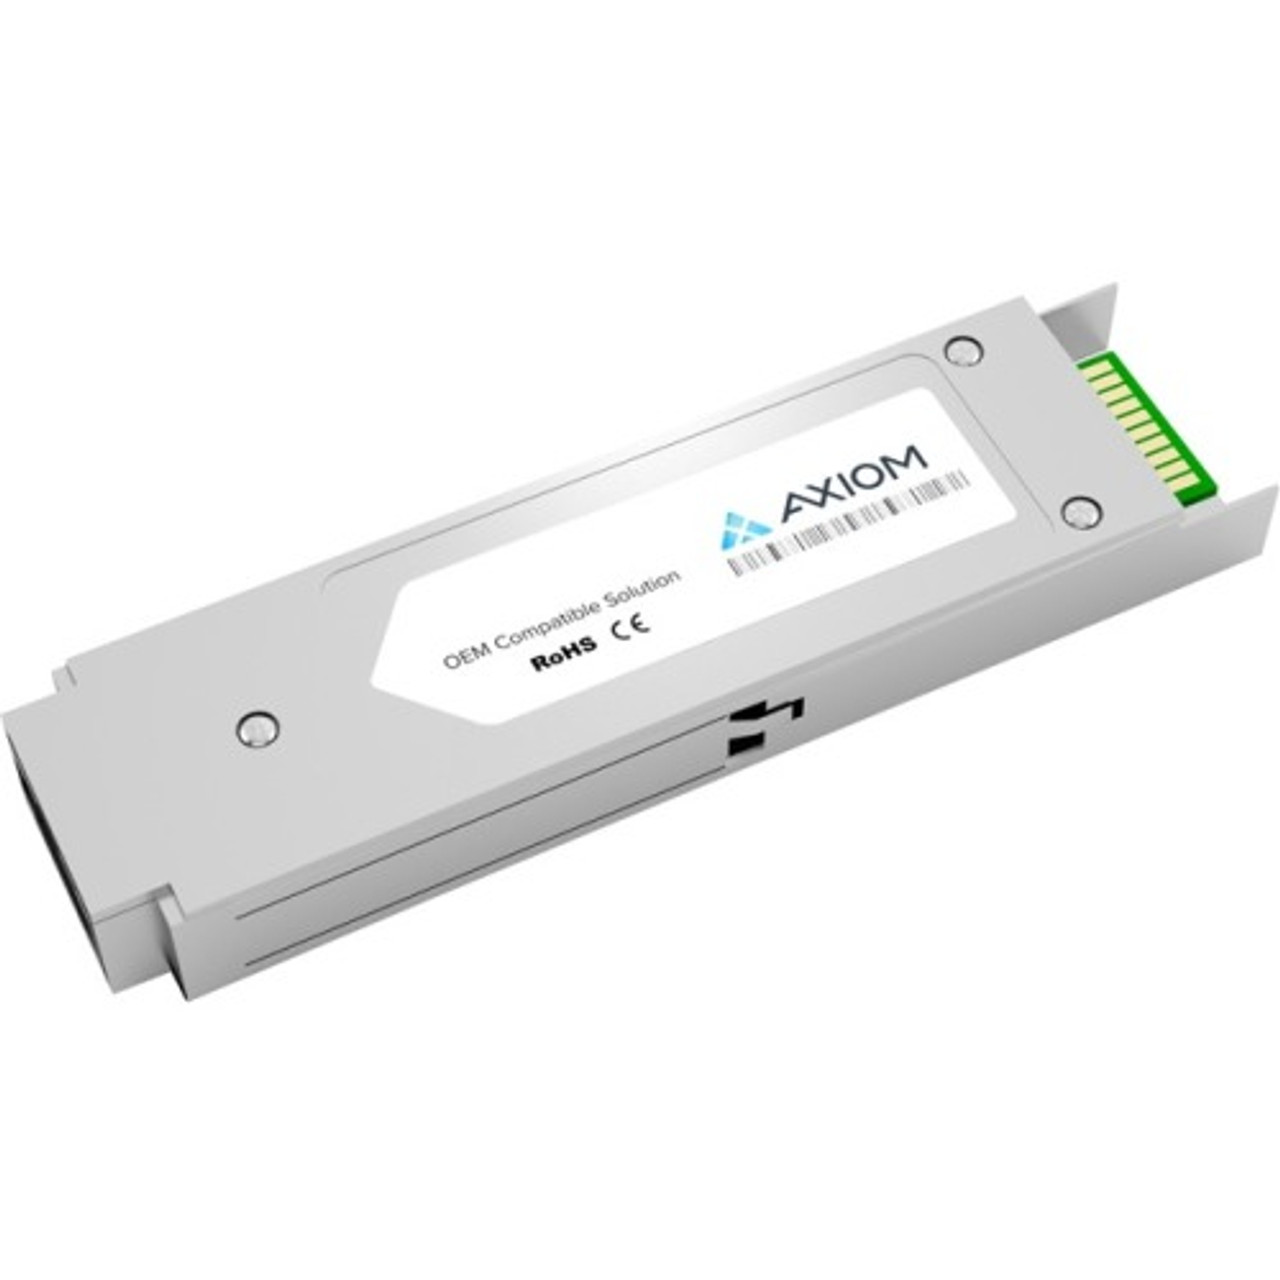 ONSXC10GS1-AX Axiom 10Gbps OC-192/STM-64 Single-mode Fiber 80km 1558.17nm LC Connector XFP Transceiver Module